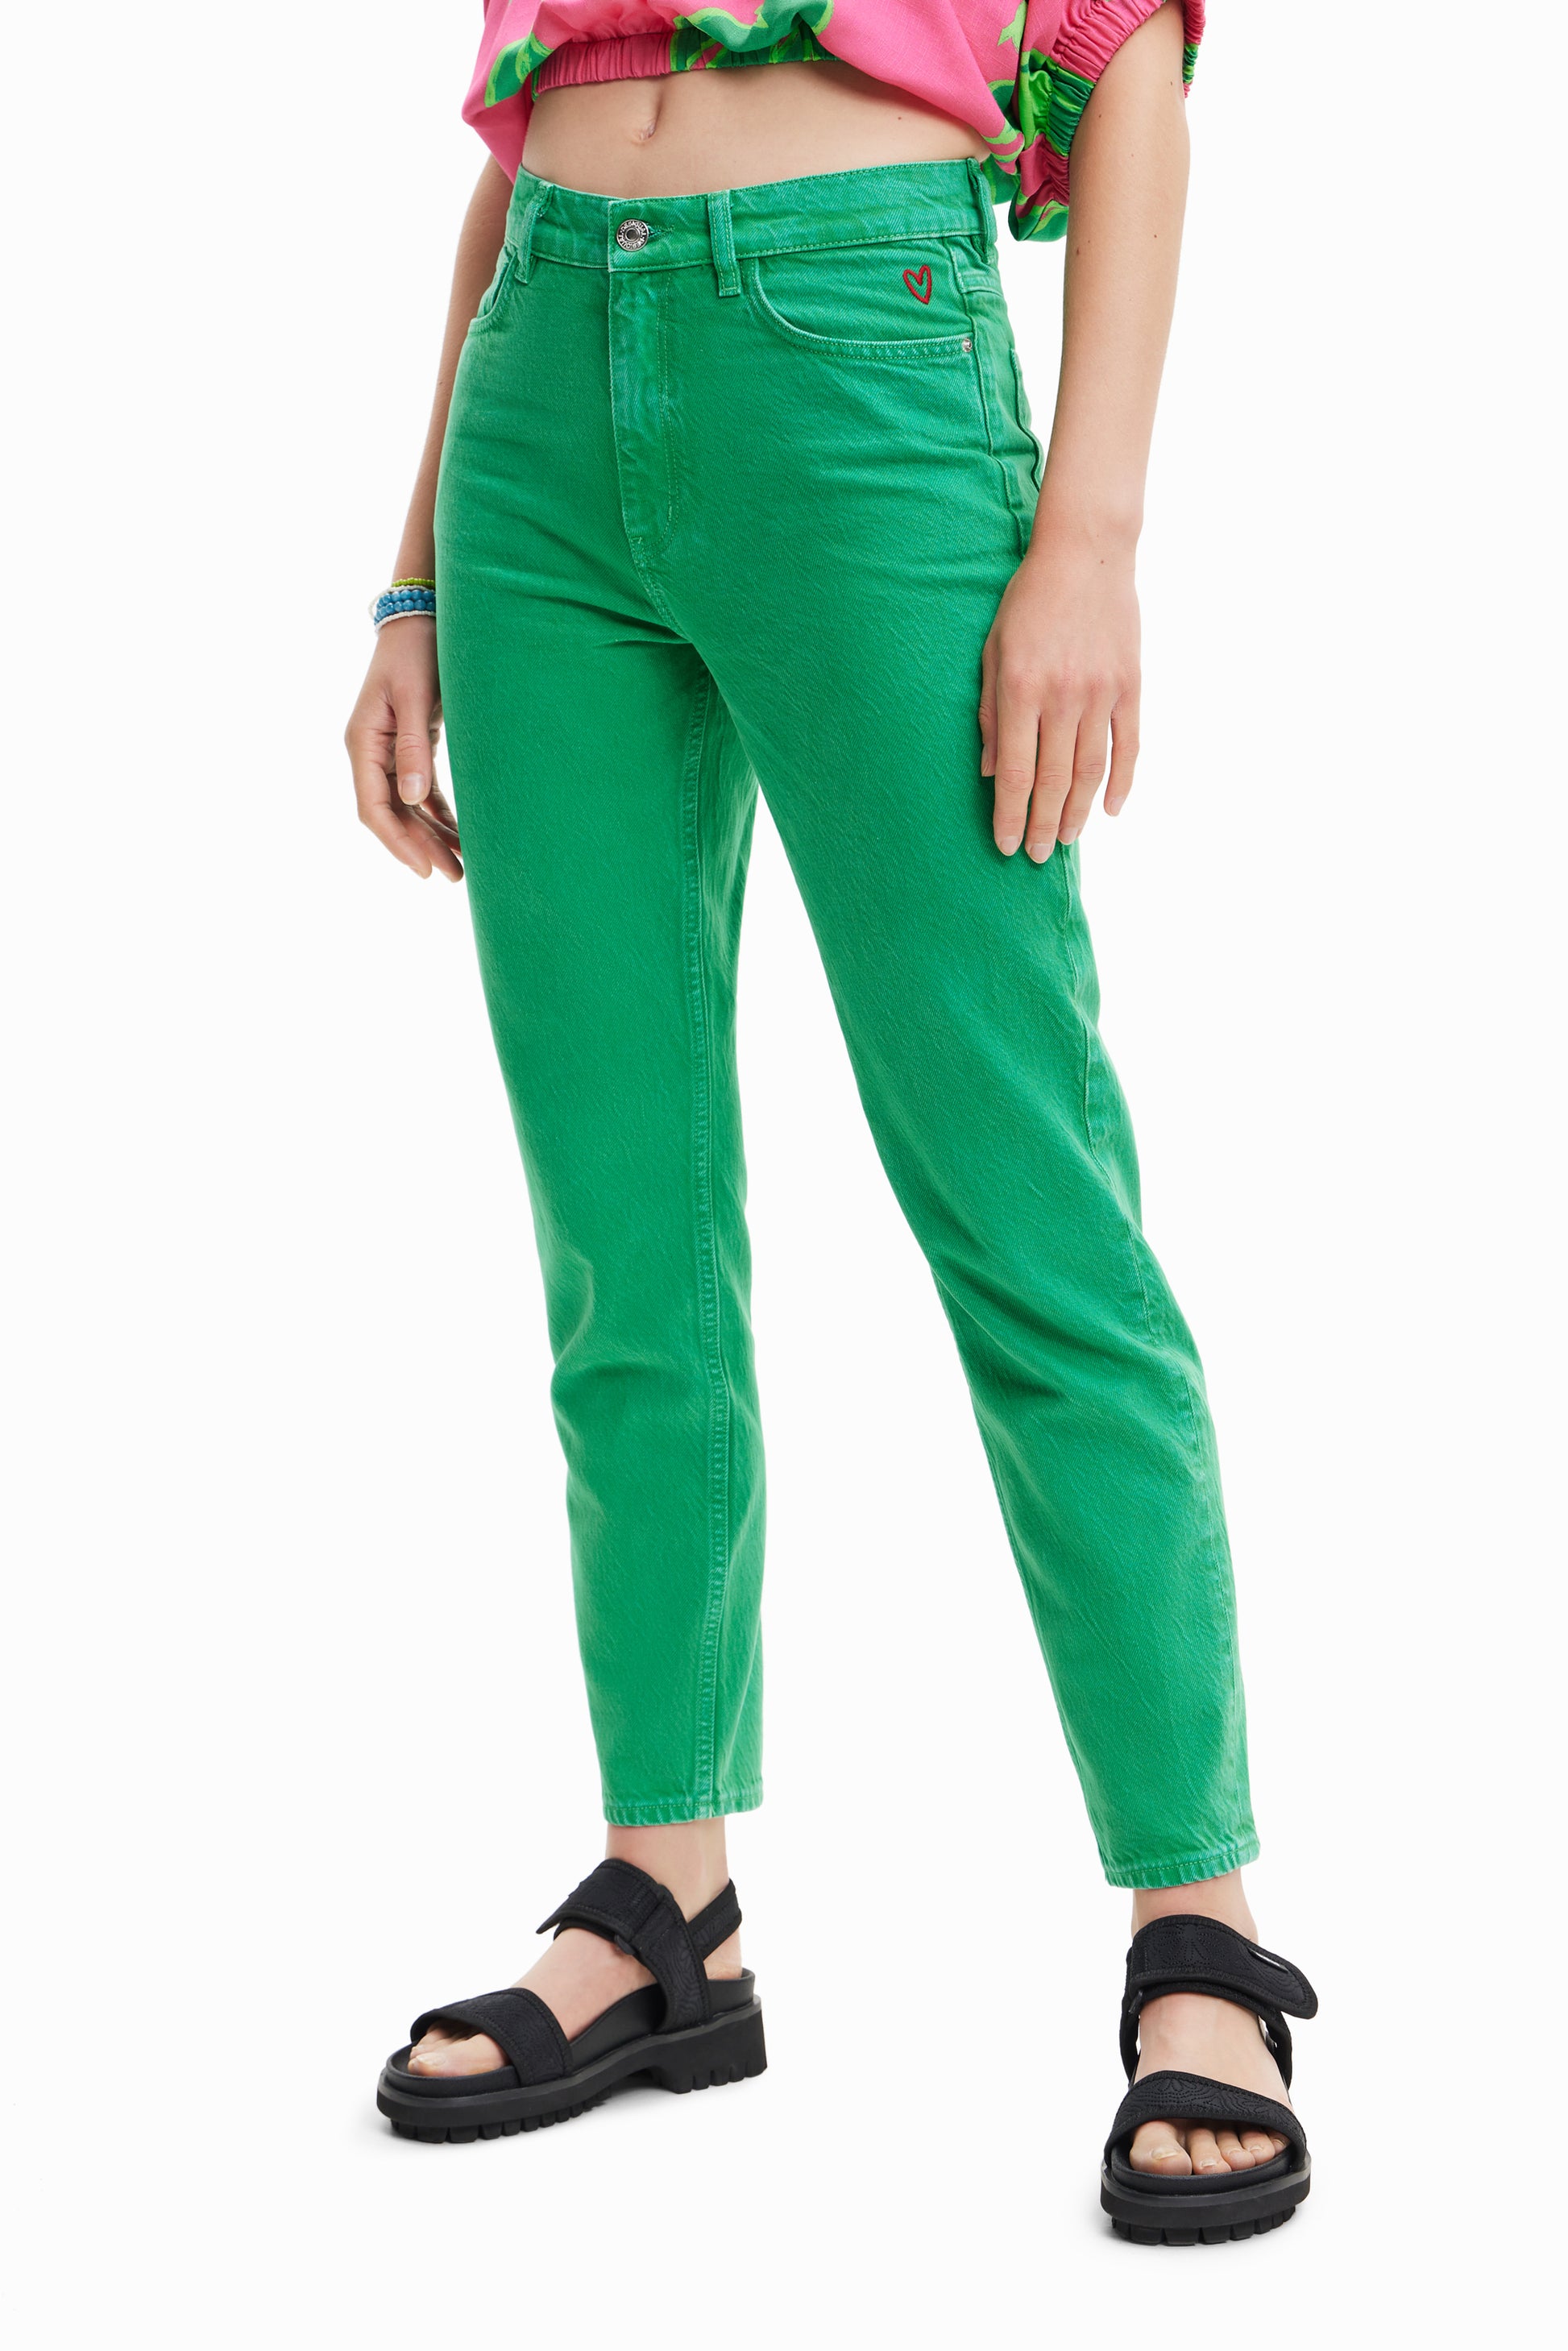 Desigual-jeans-green-front